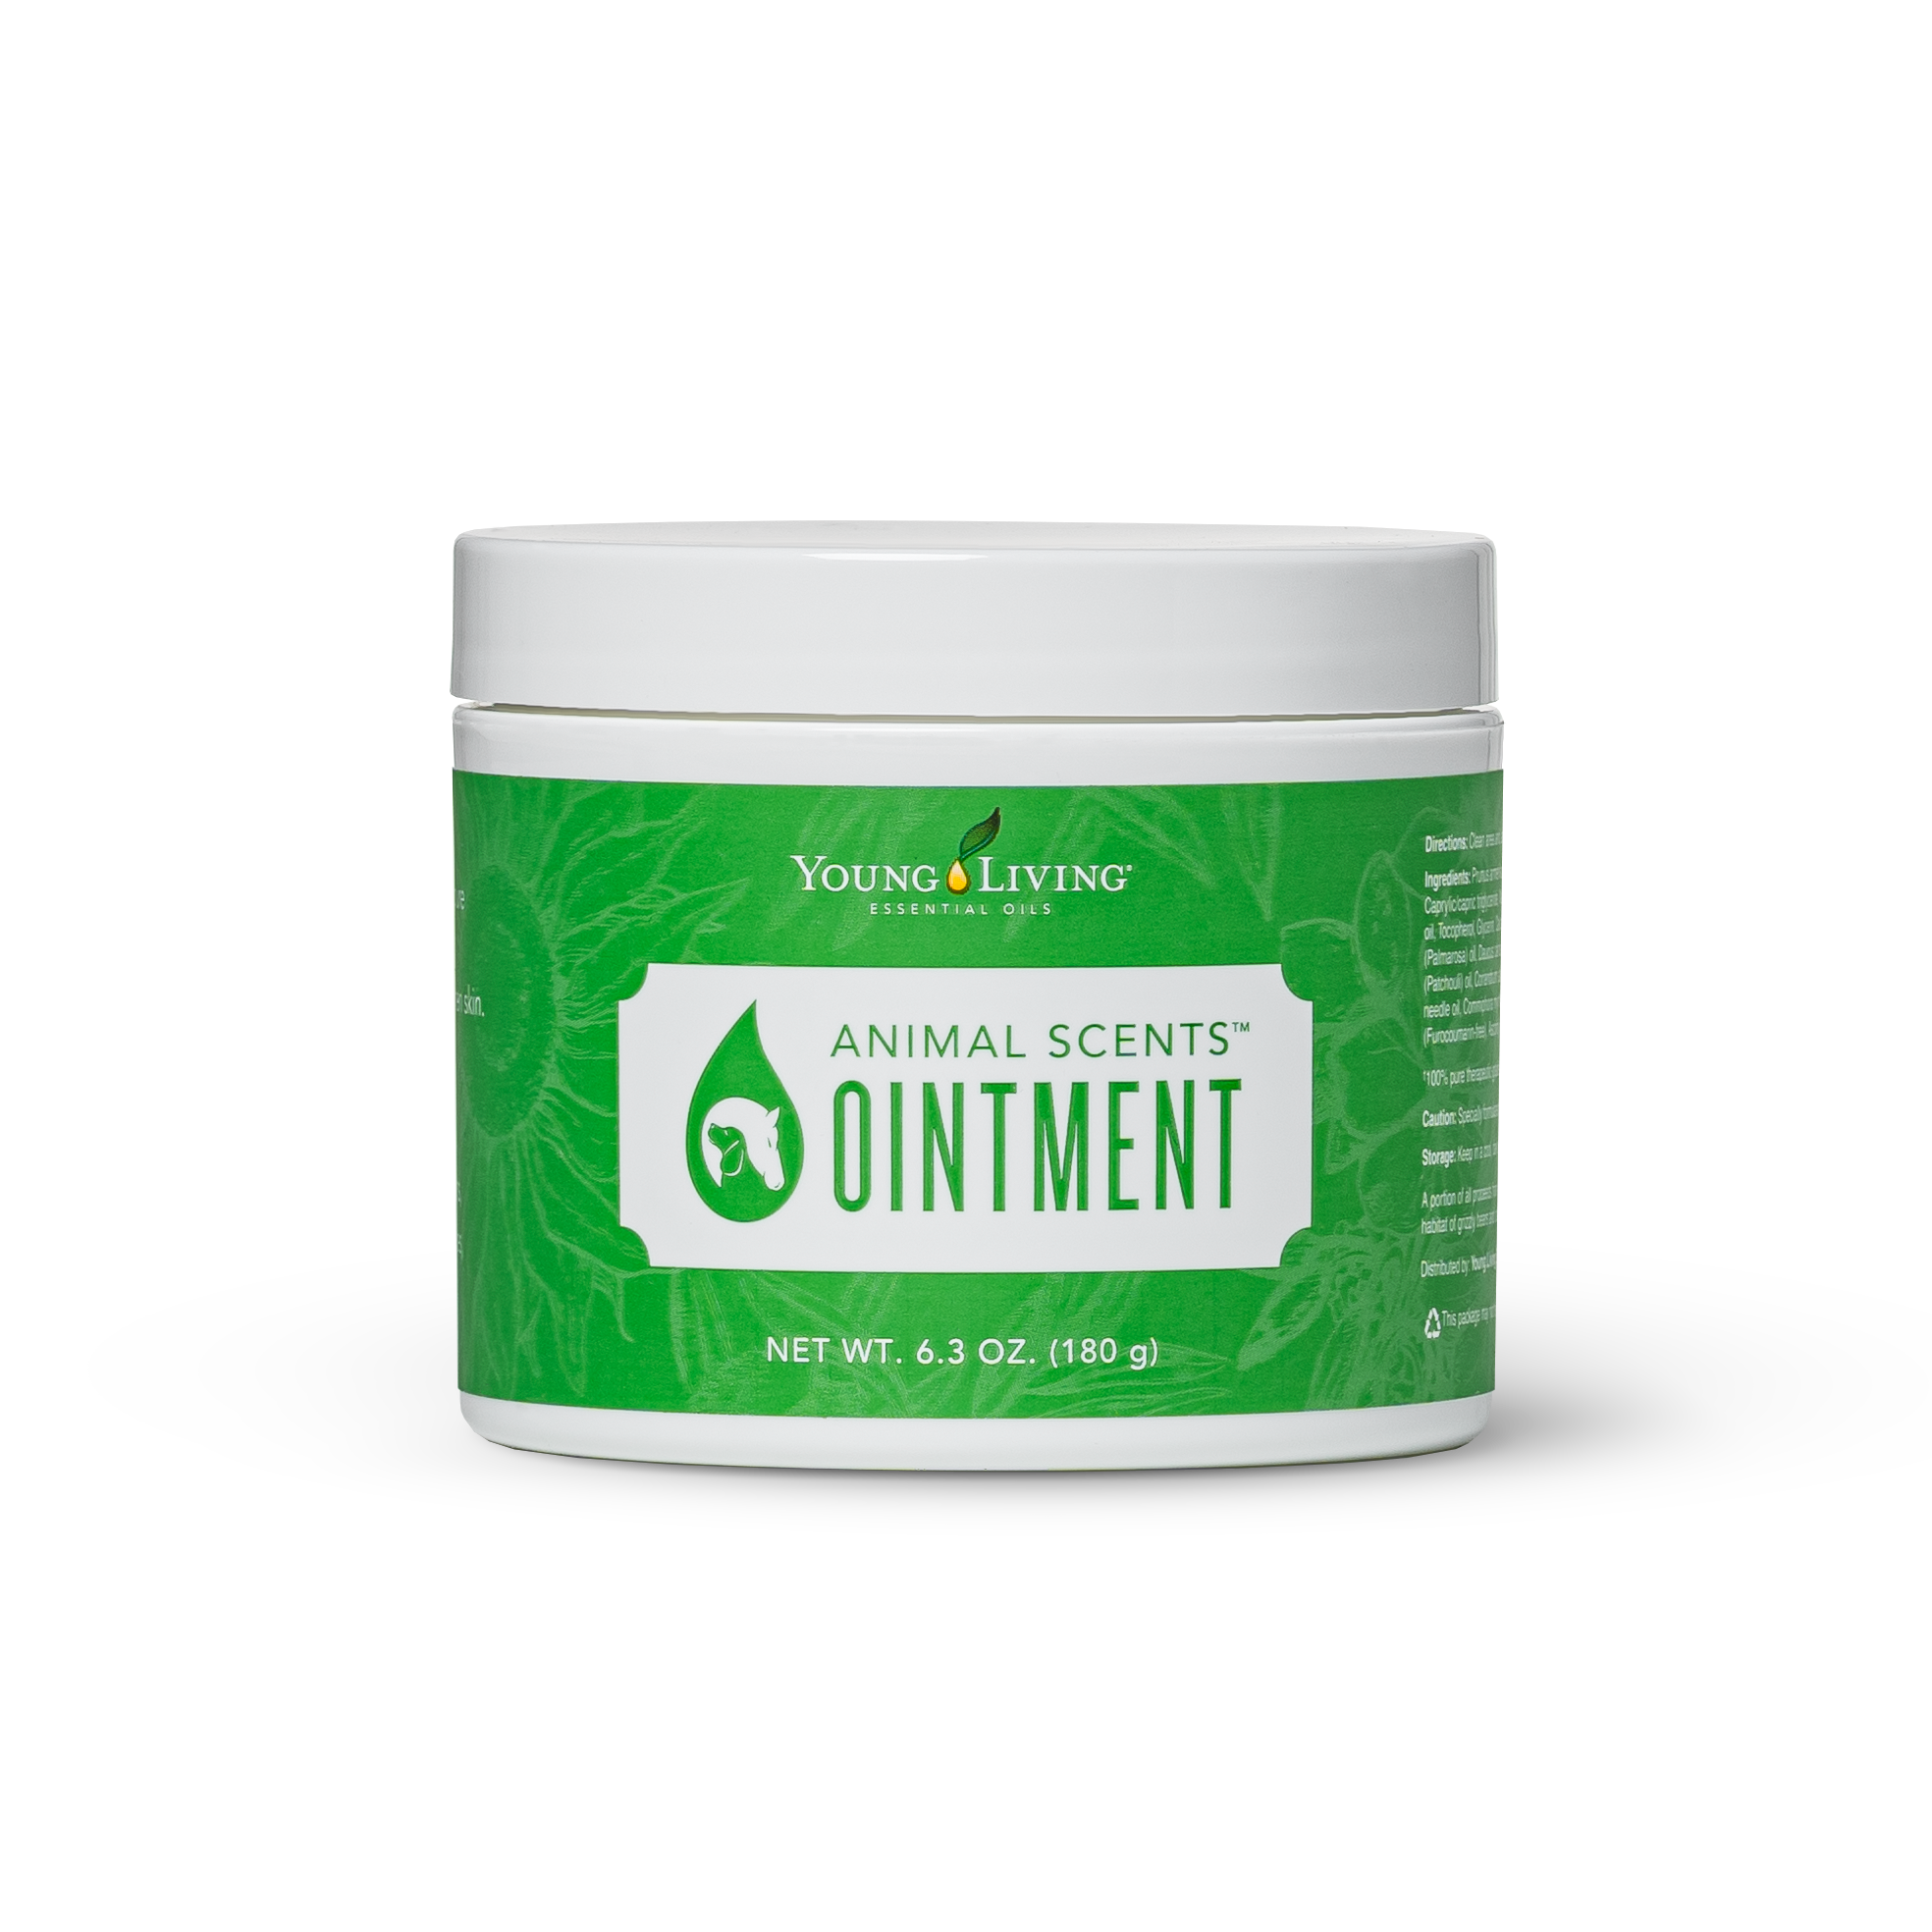 Animal Scents Ointment Silo.png